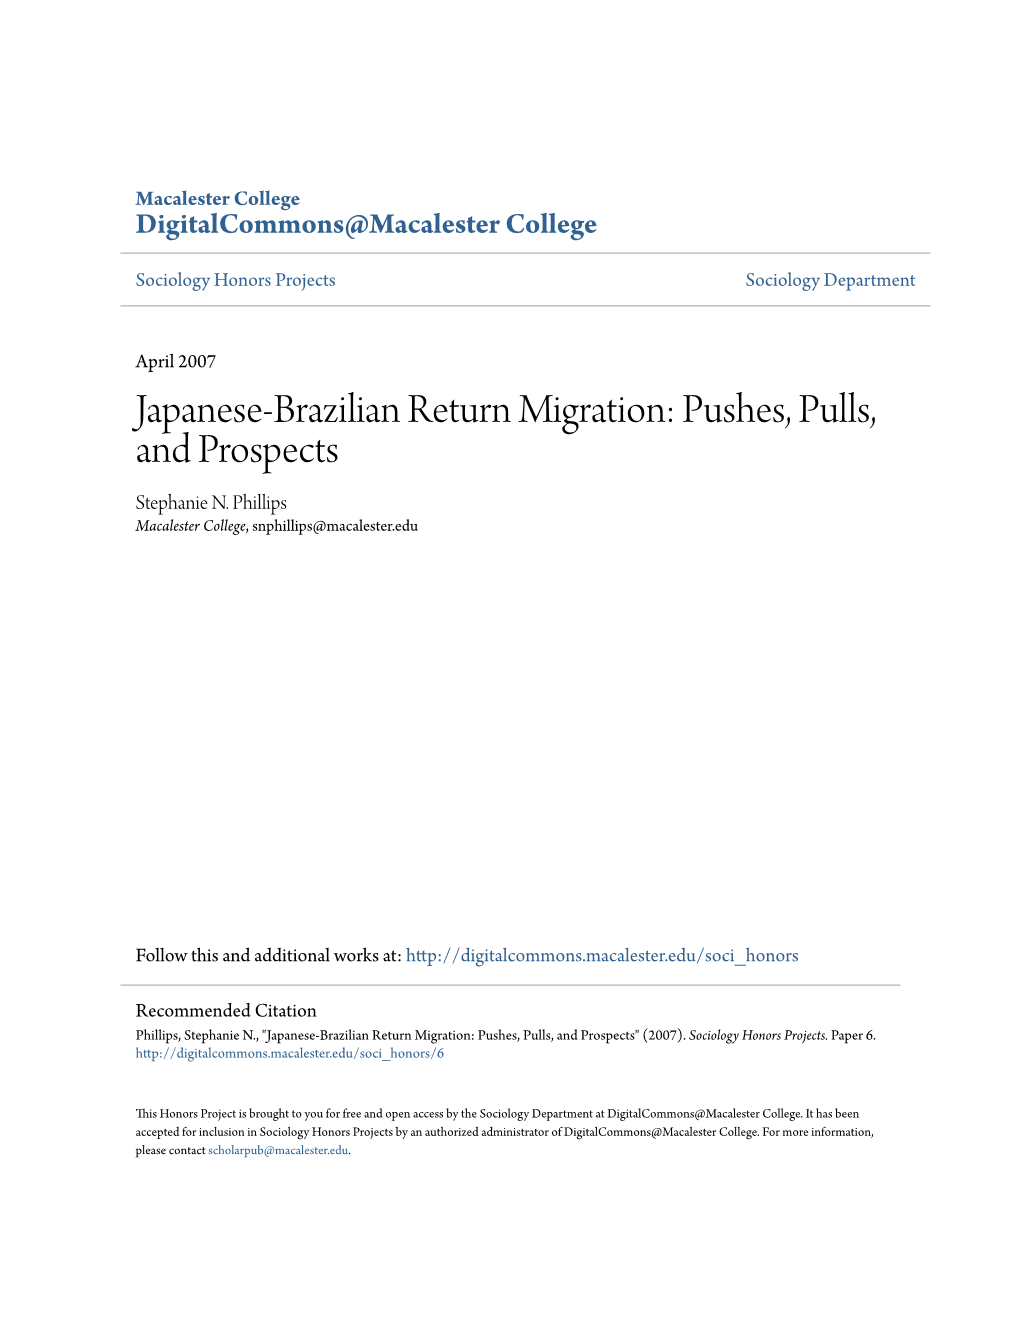 Japanese-Brazilian Return Migration: Pushes, Pulls, and Prospects Stephanie N